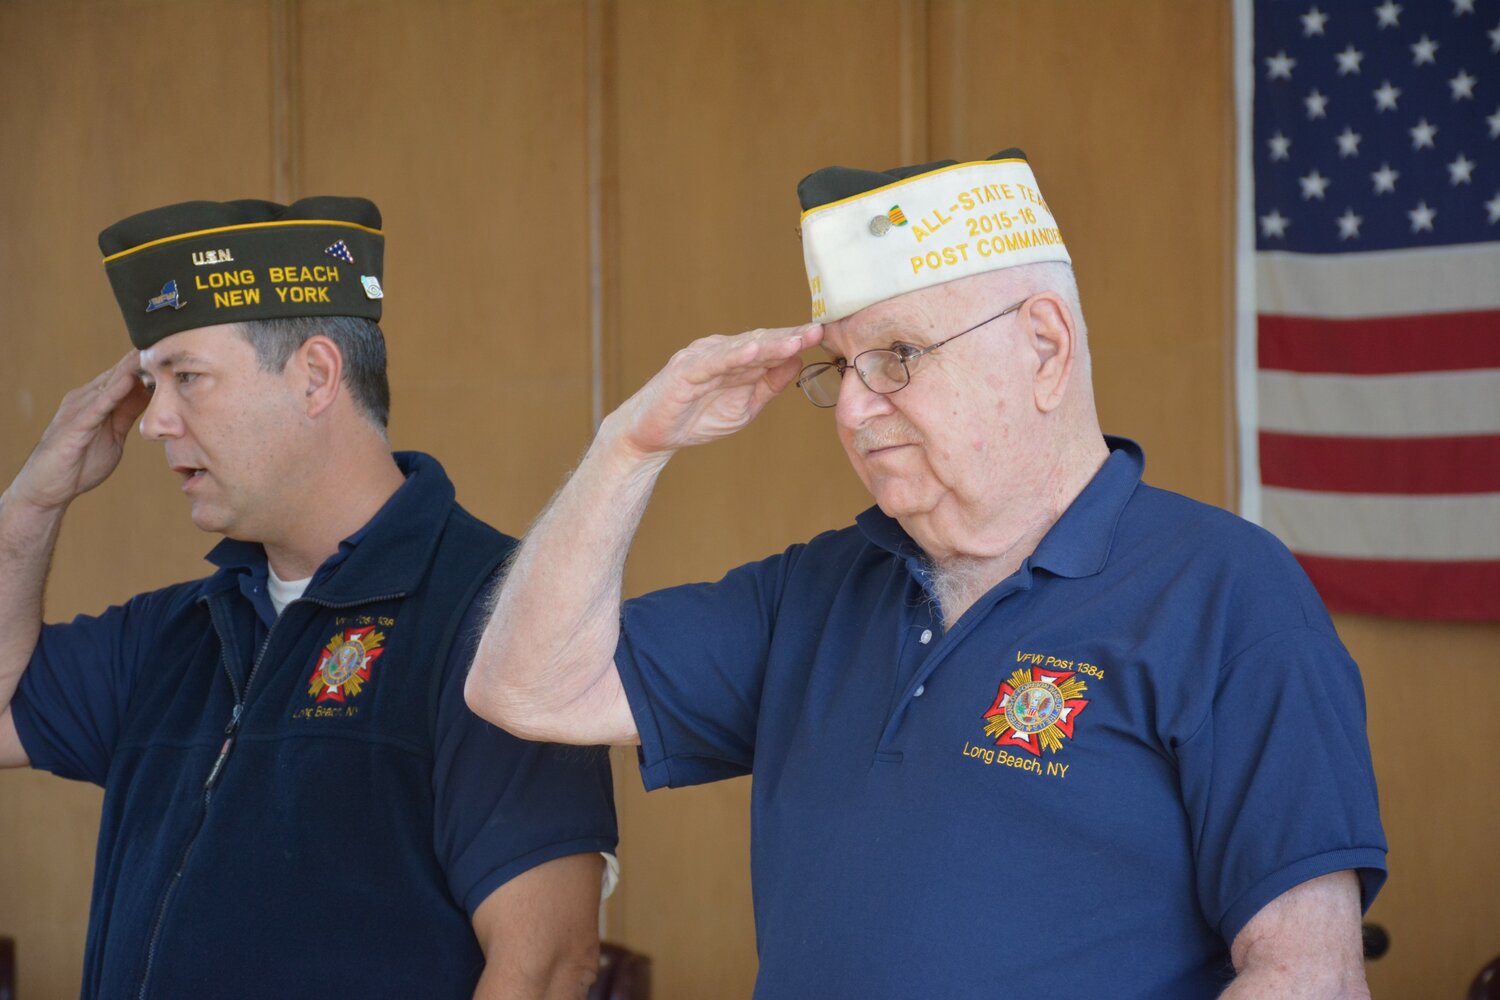 Veterans were saluted and thanked for their service Saturday at City Hall, as they are each year.